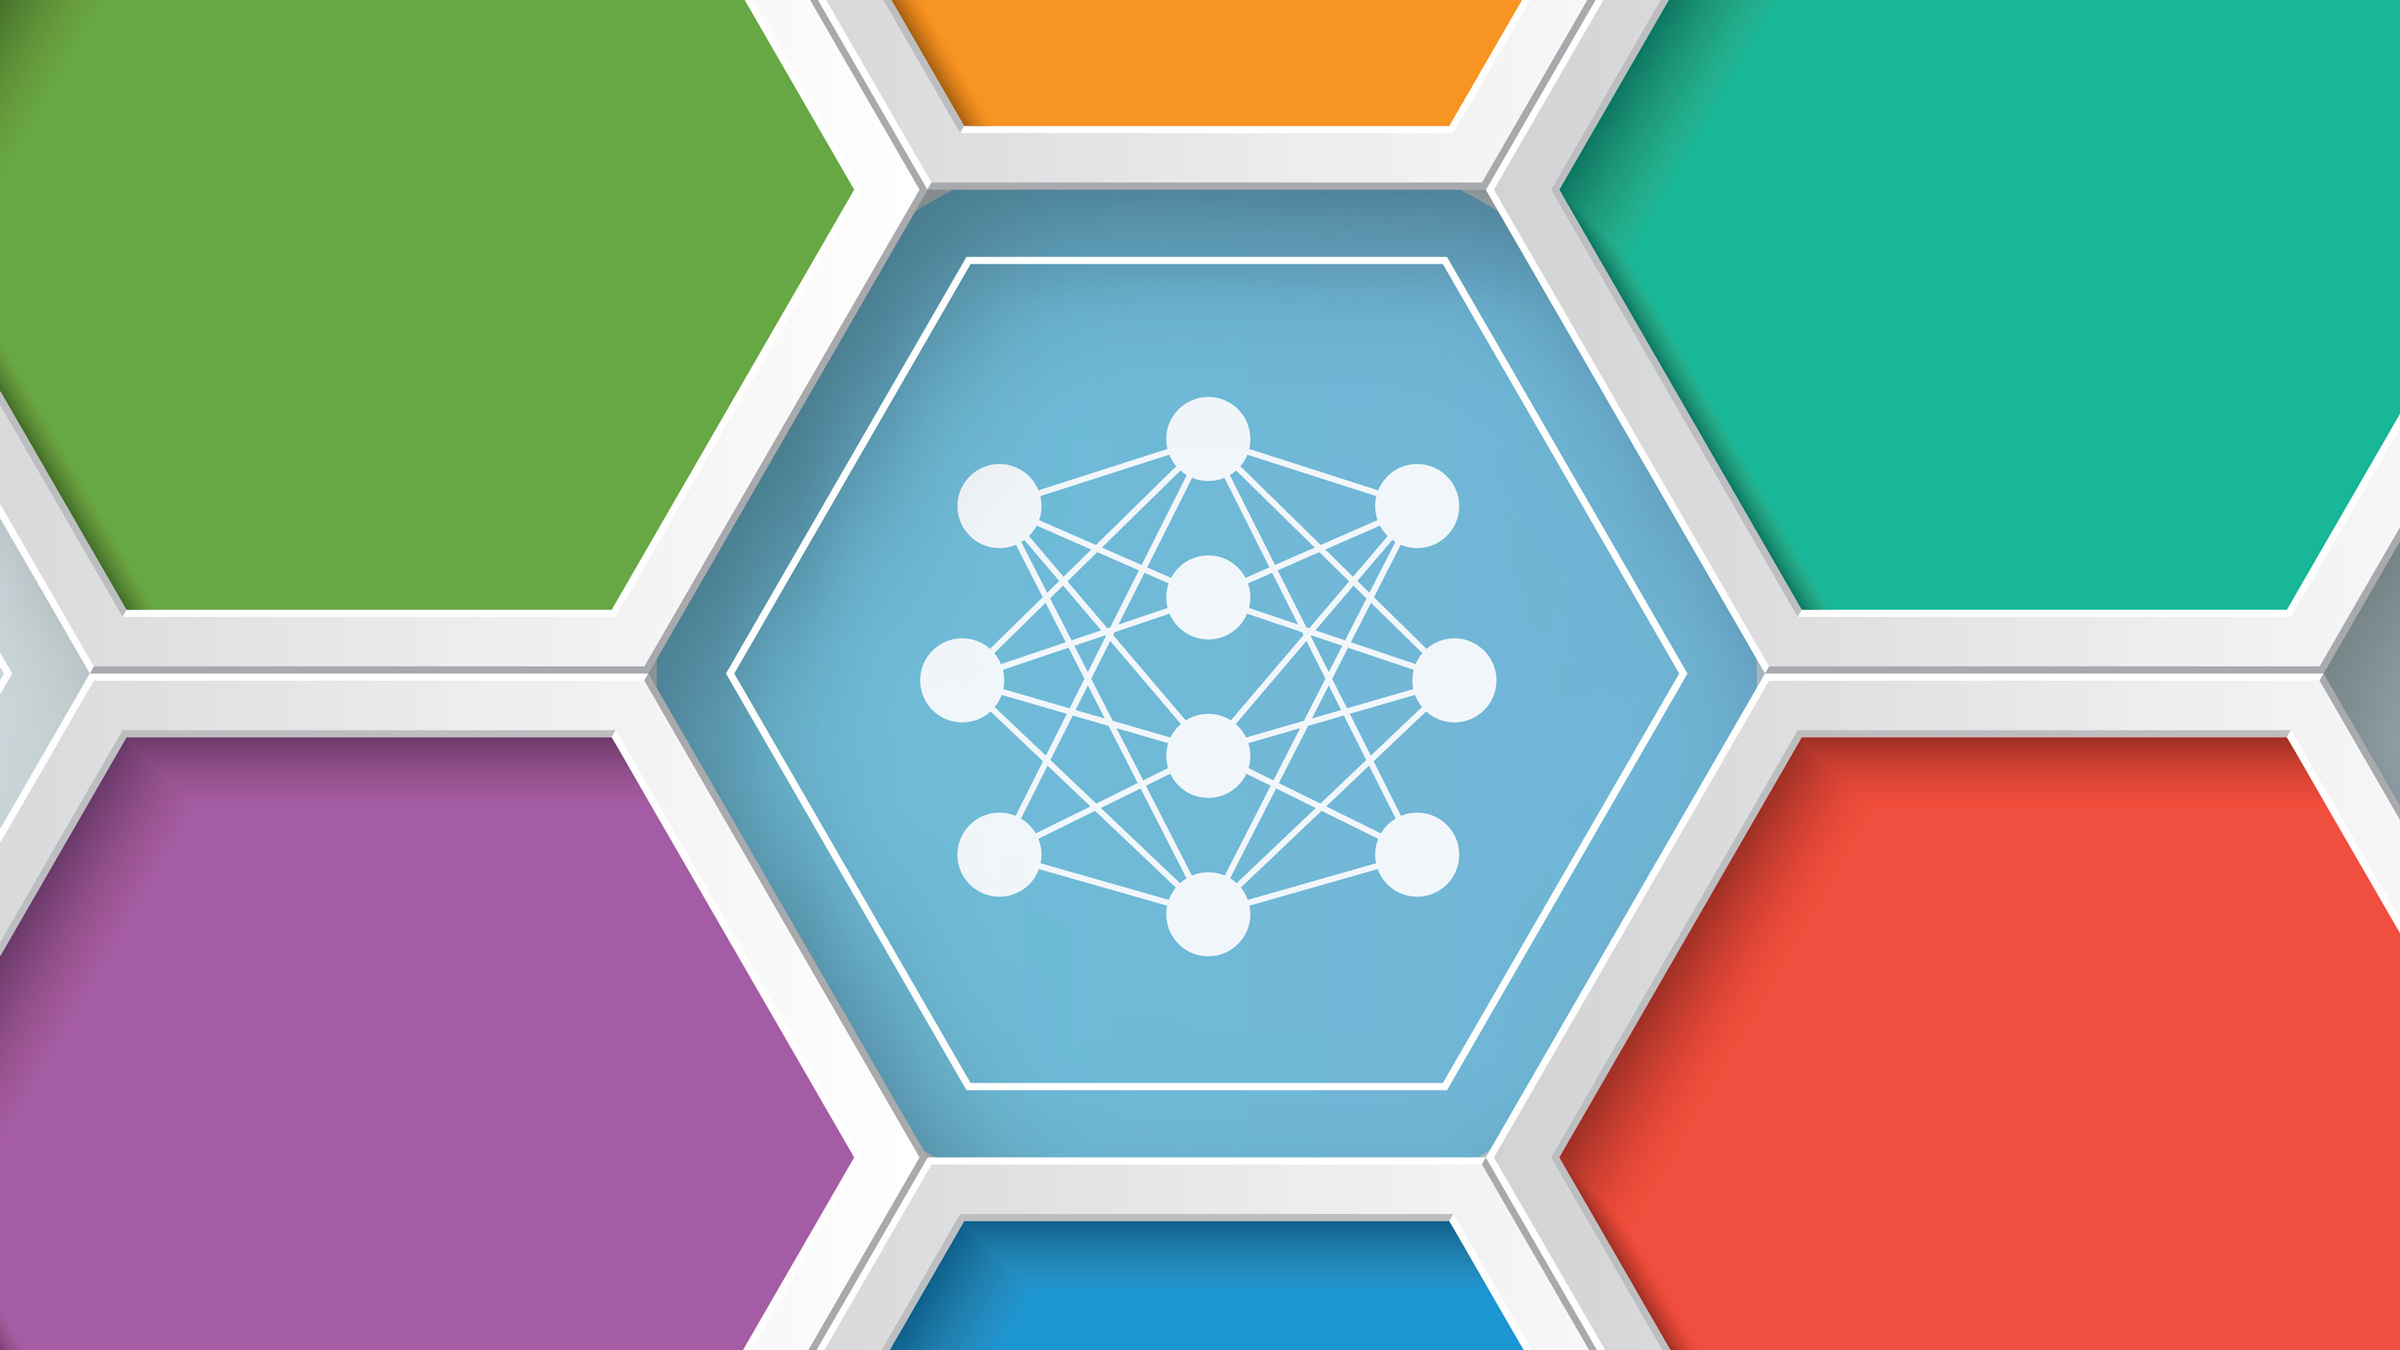 connected dot pattern surrounded by colored hexagons, illustration